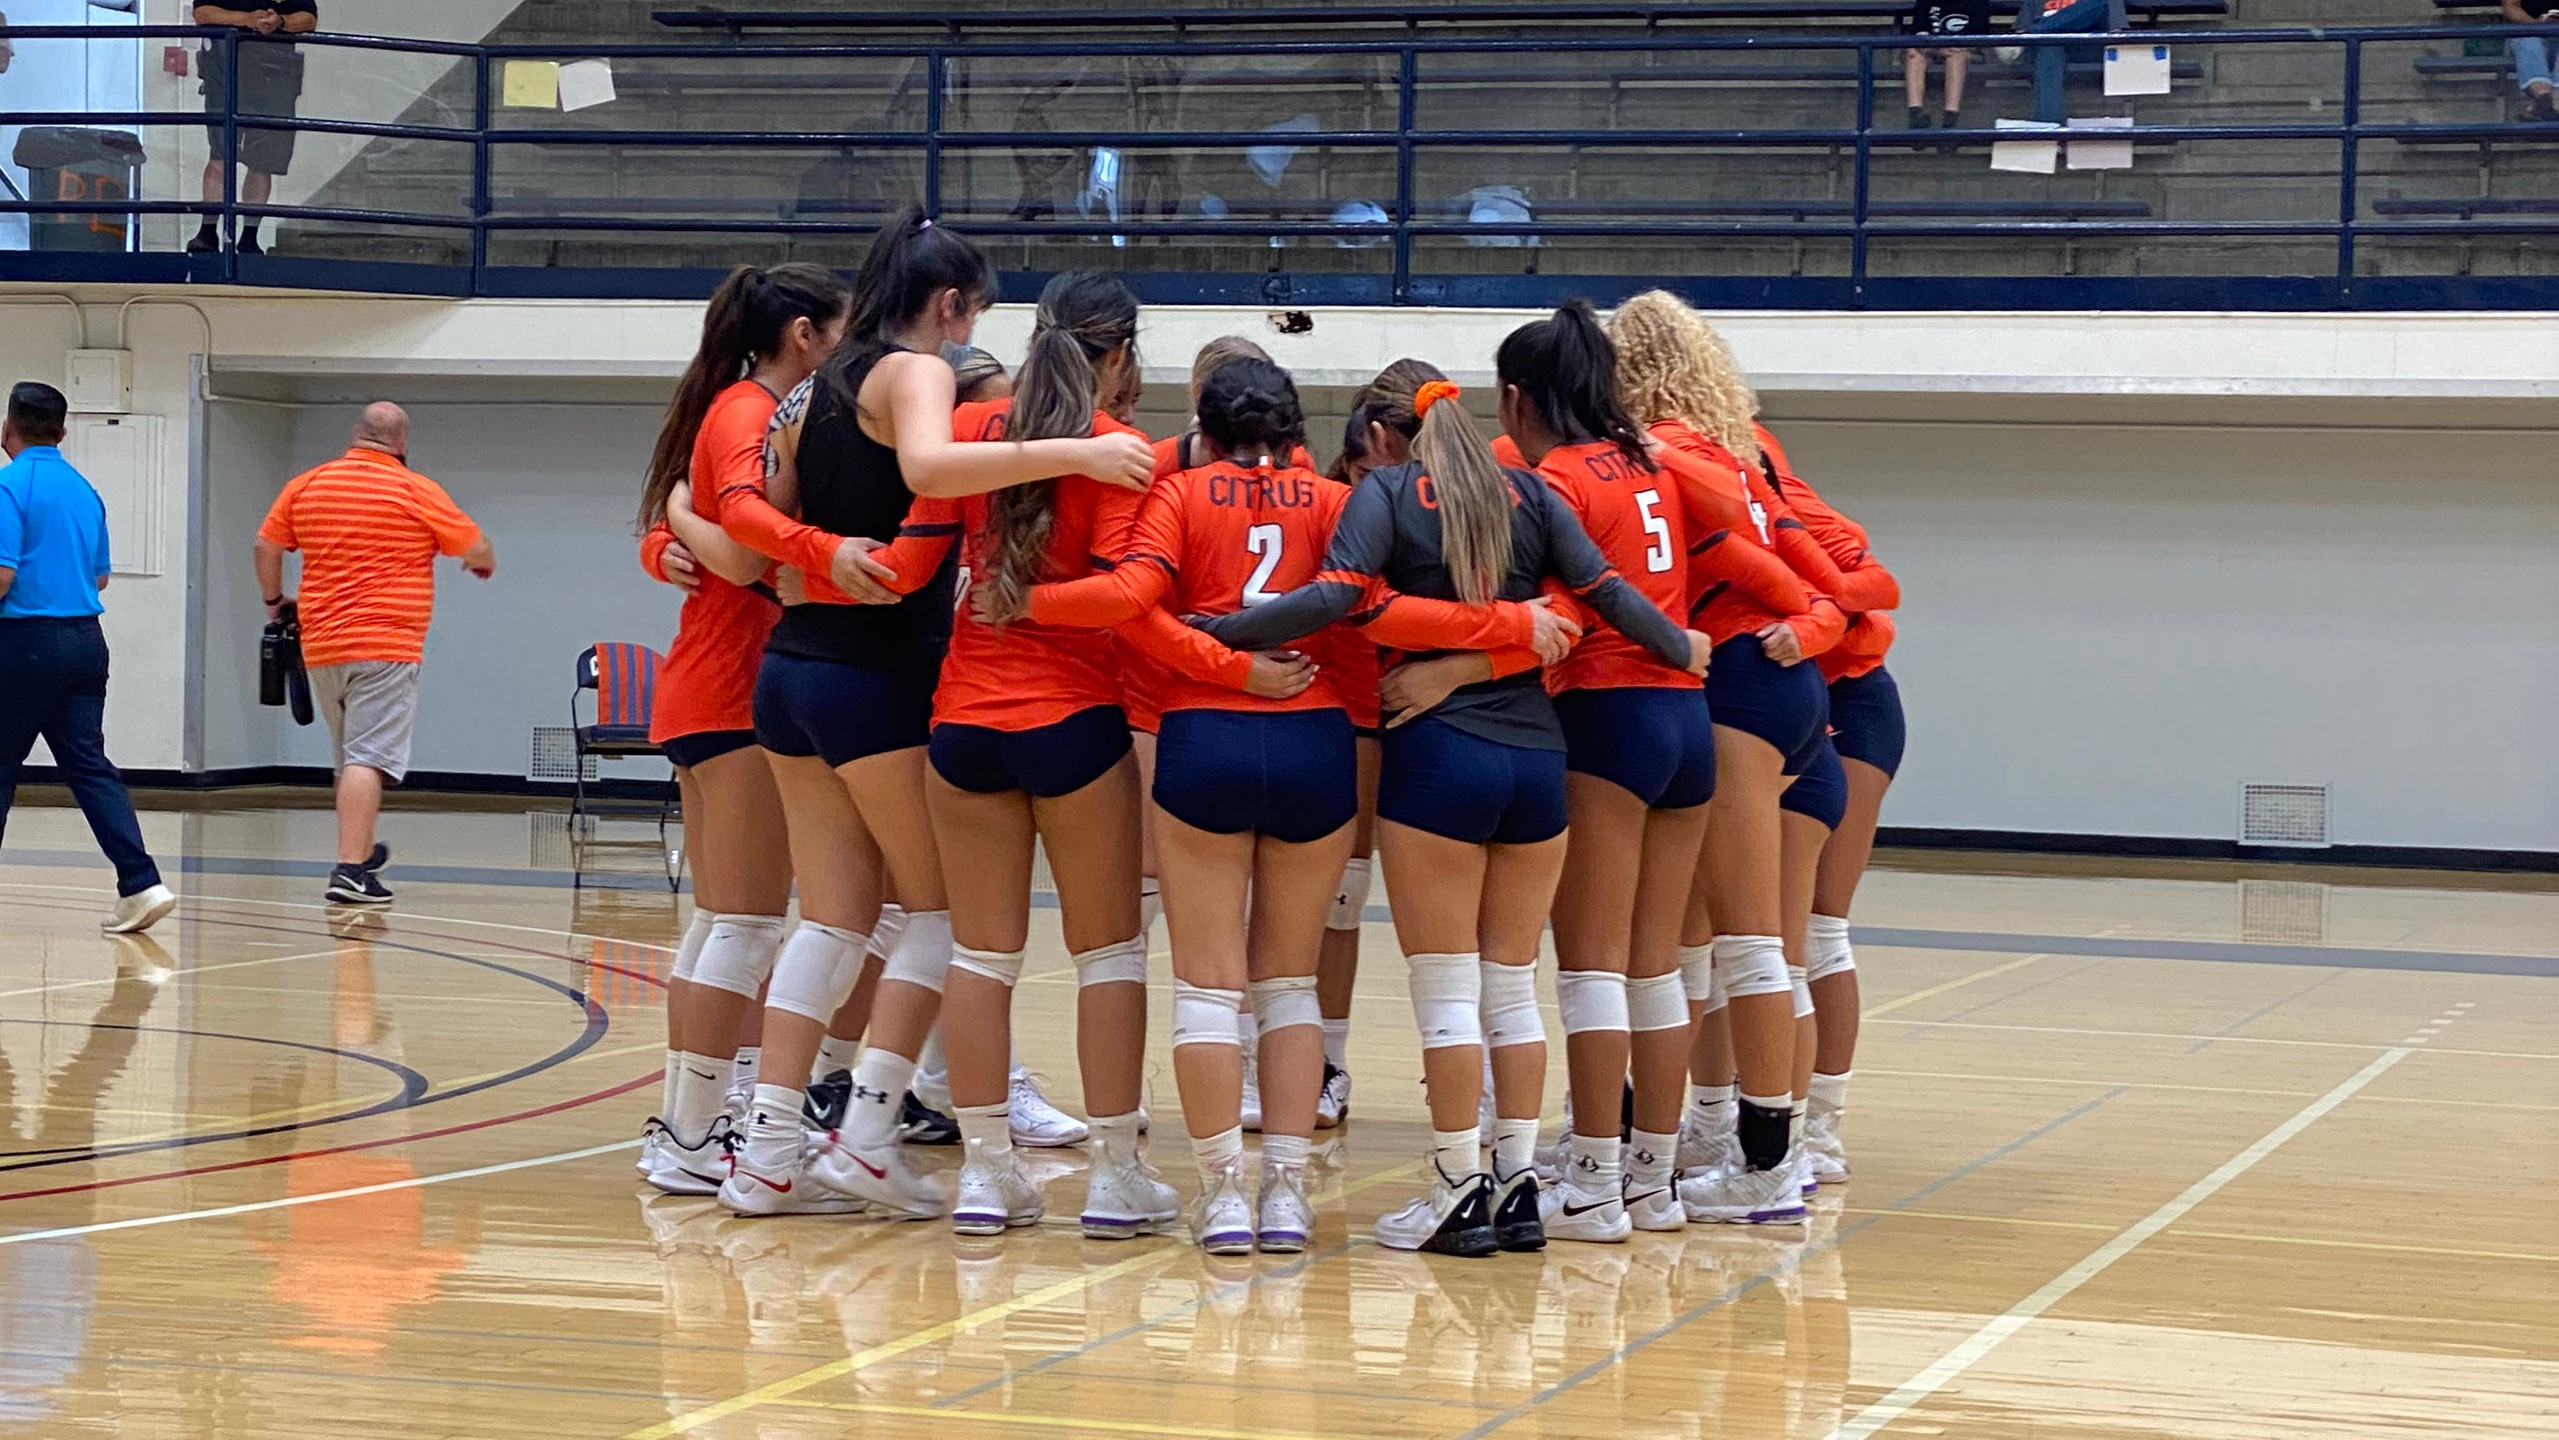 The Citrus College volleyball team huddles up.